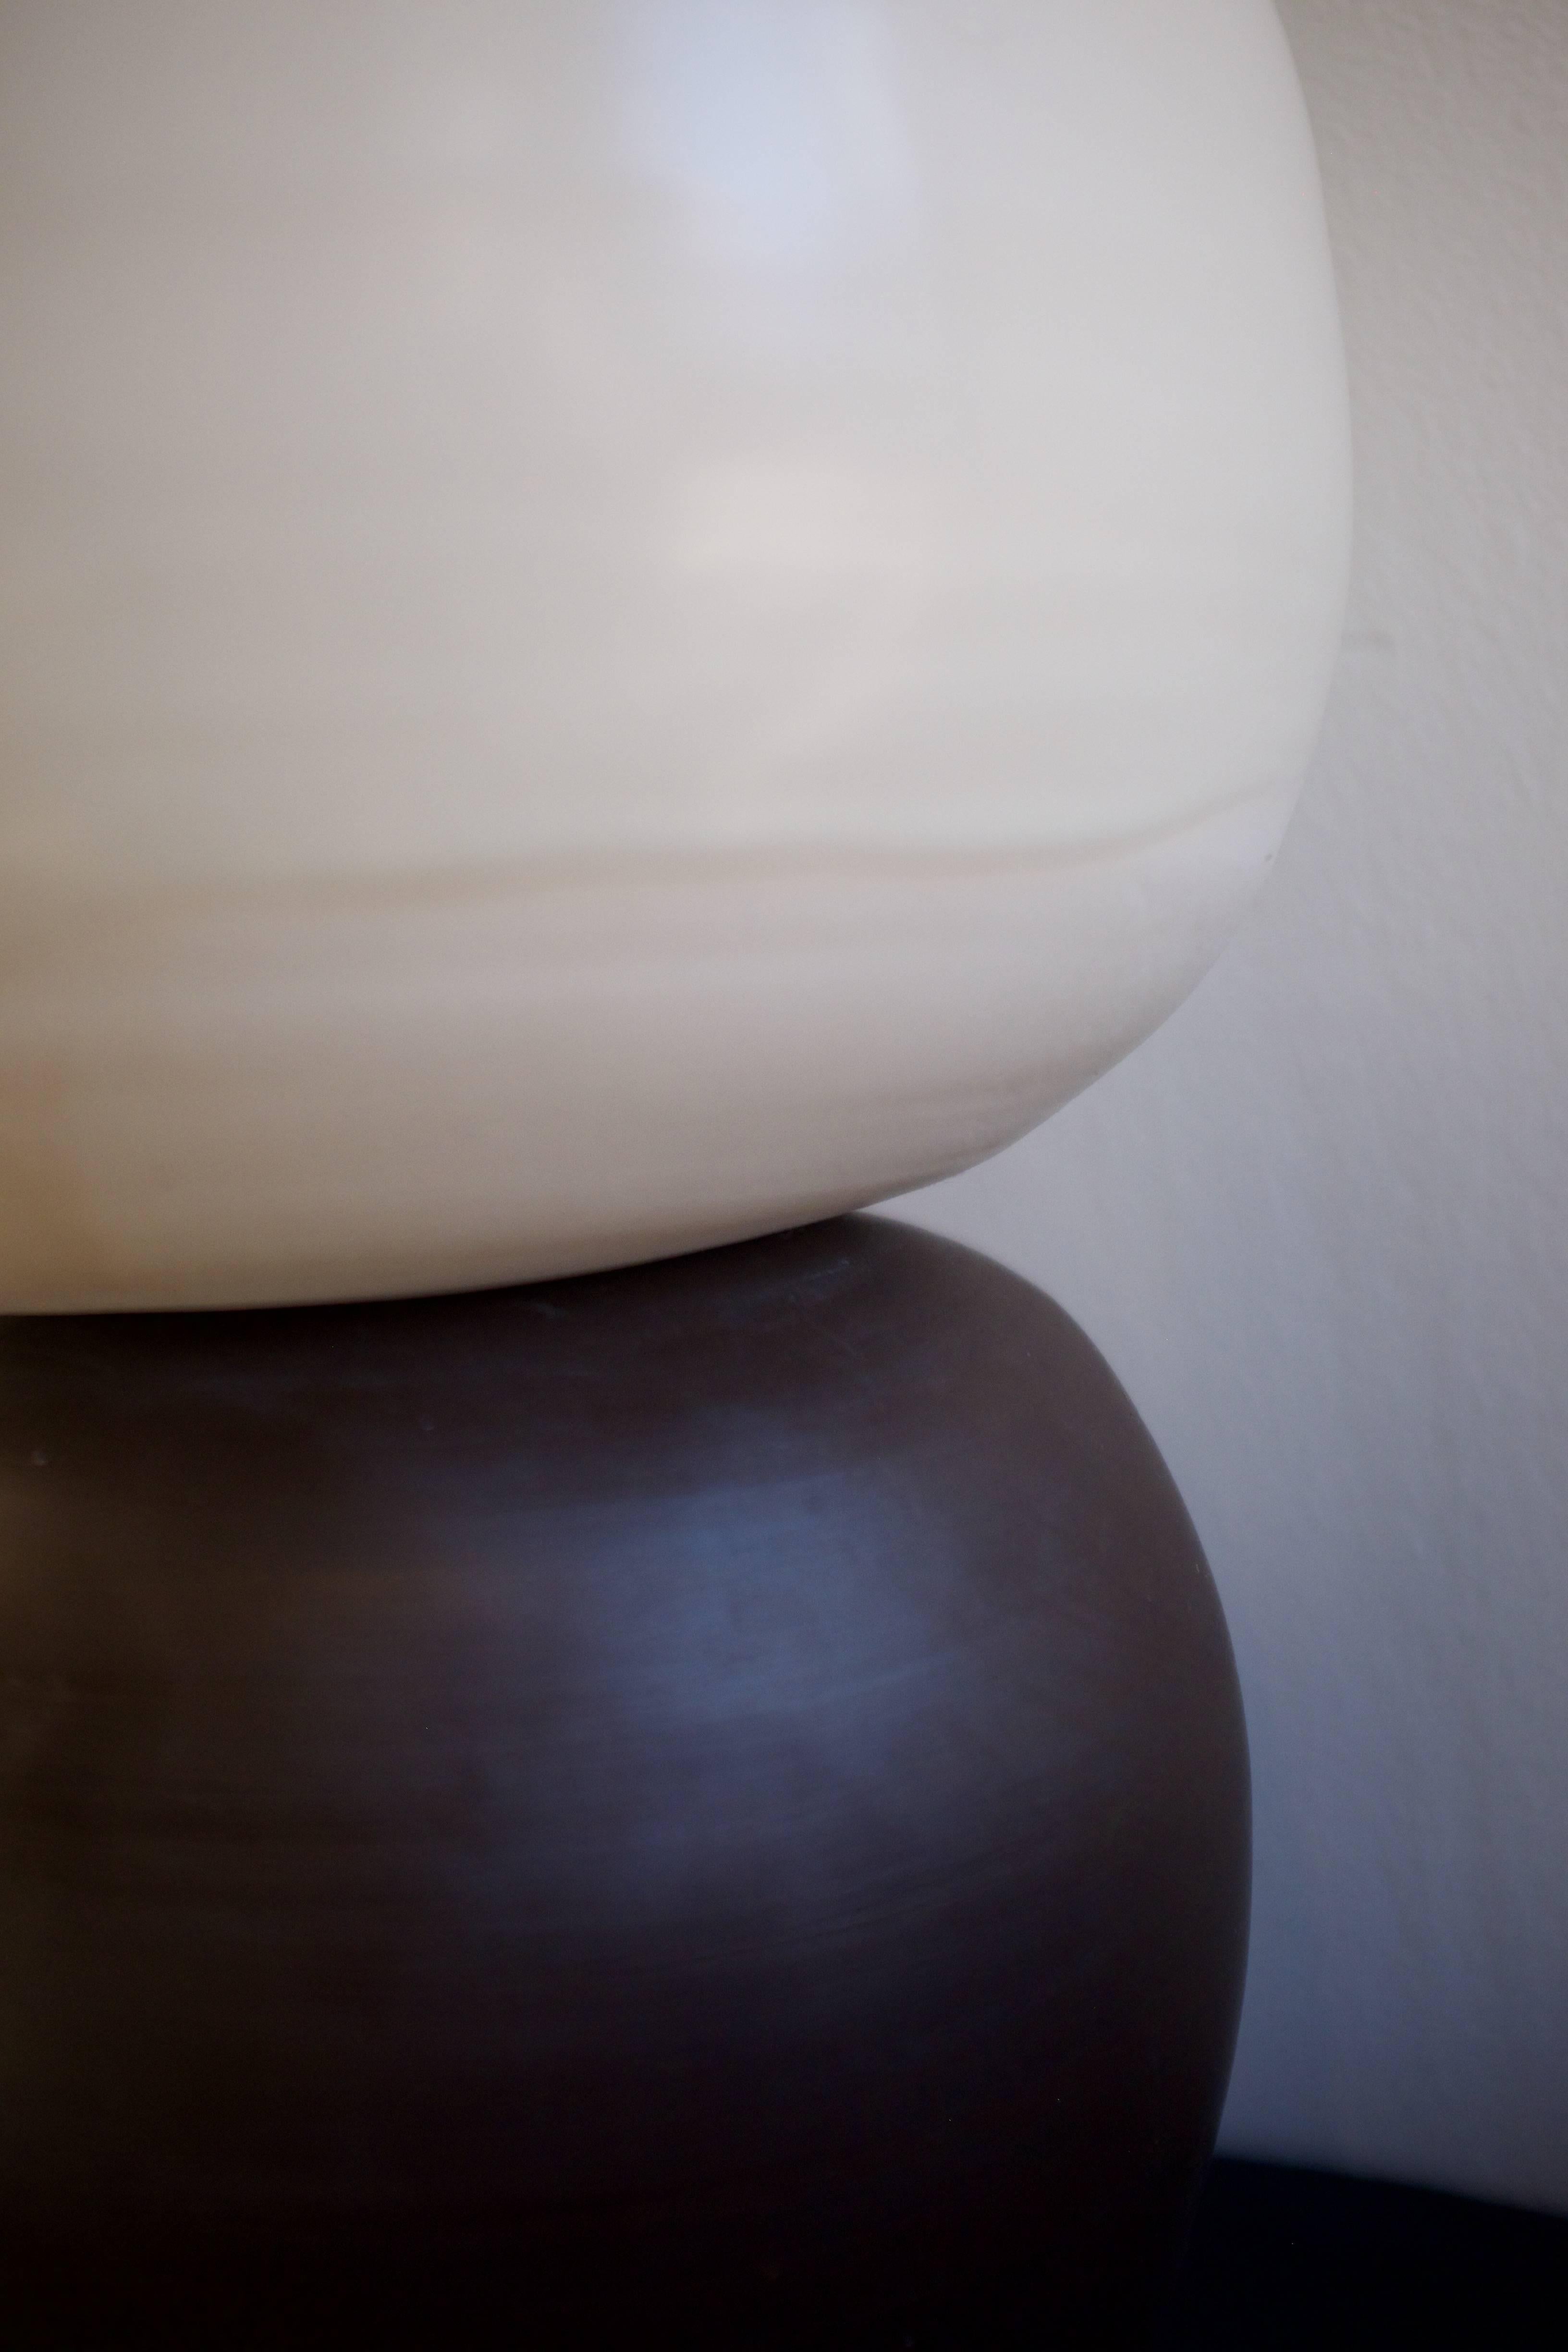 Asymmetrical Reversible Black 'Deep Brown' and White Porcelain Planter In New Condition For Sale In Aspen, CO